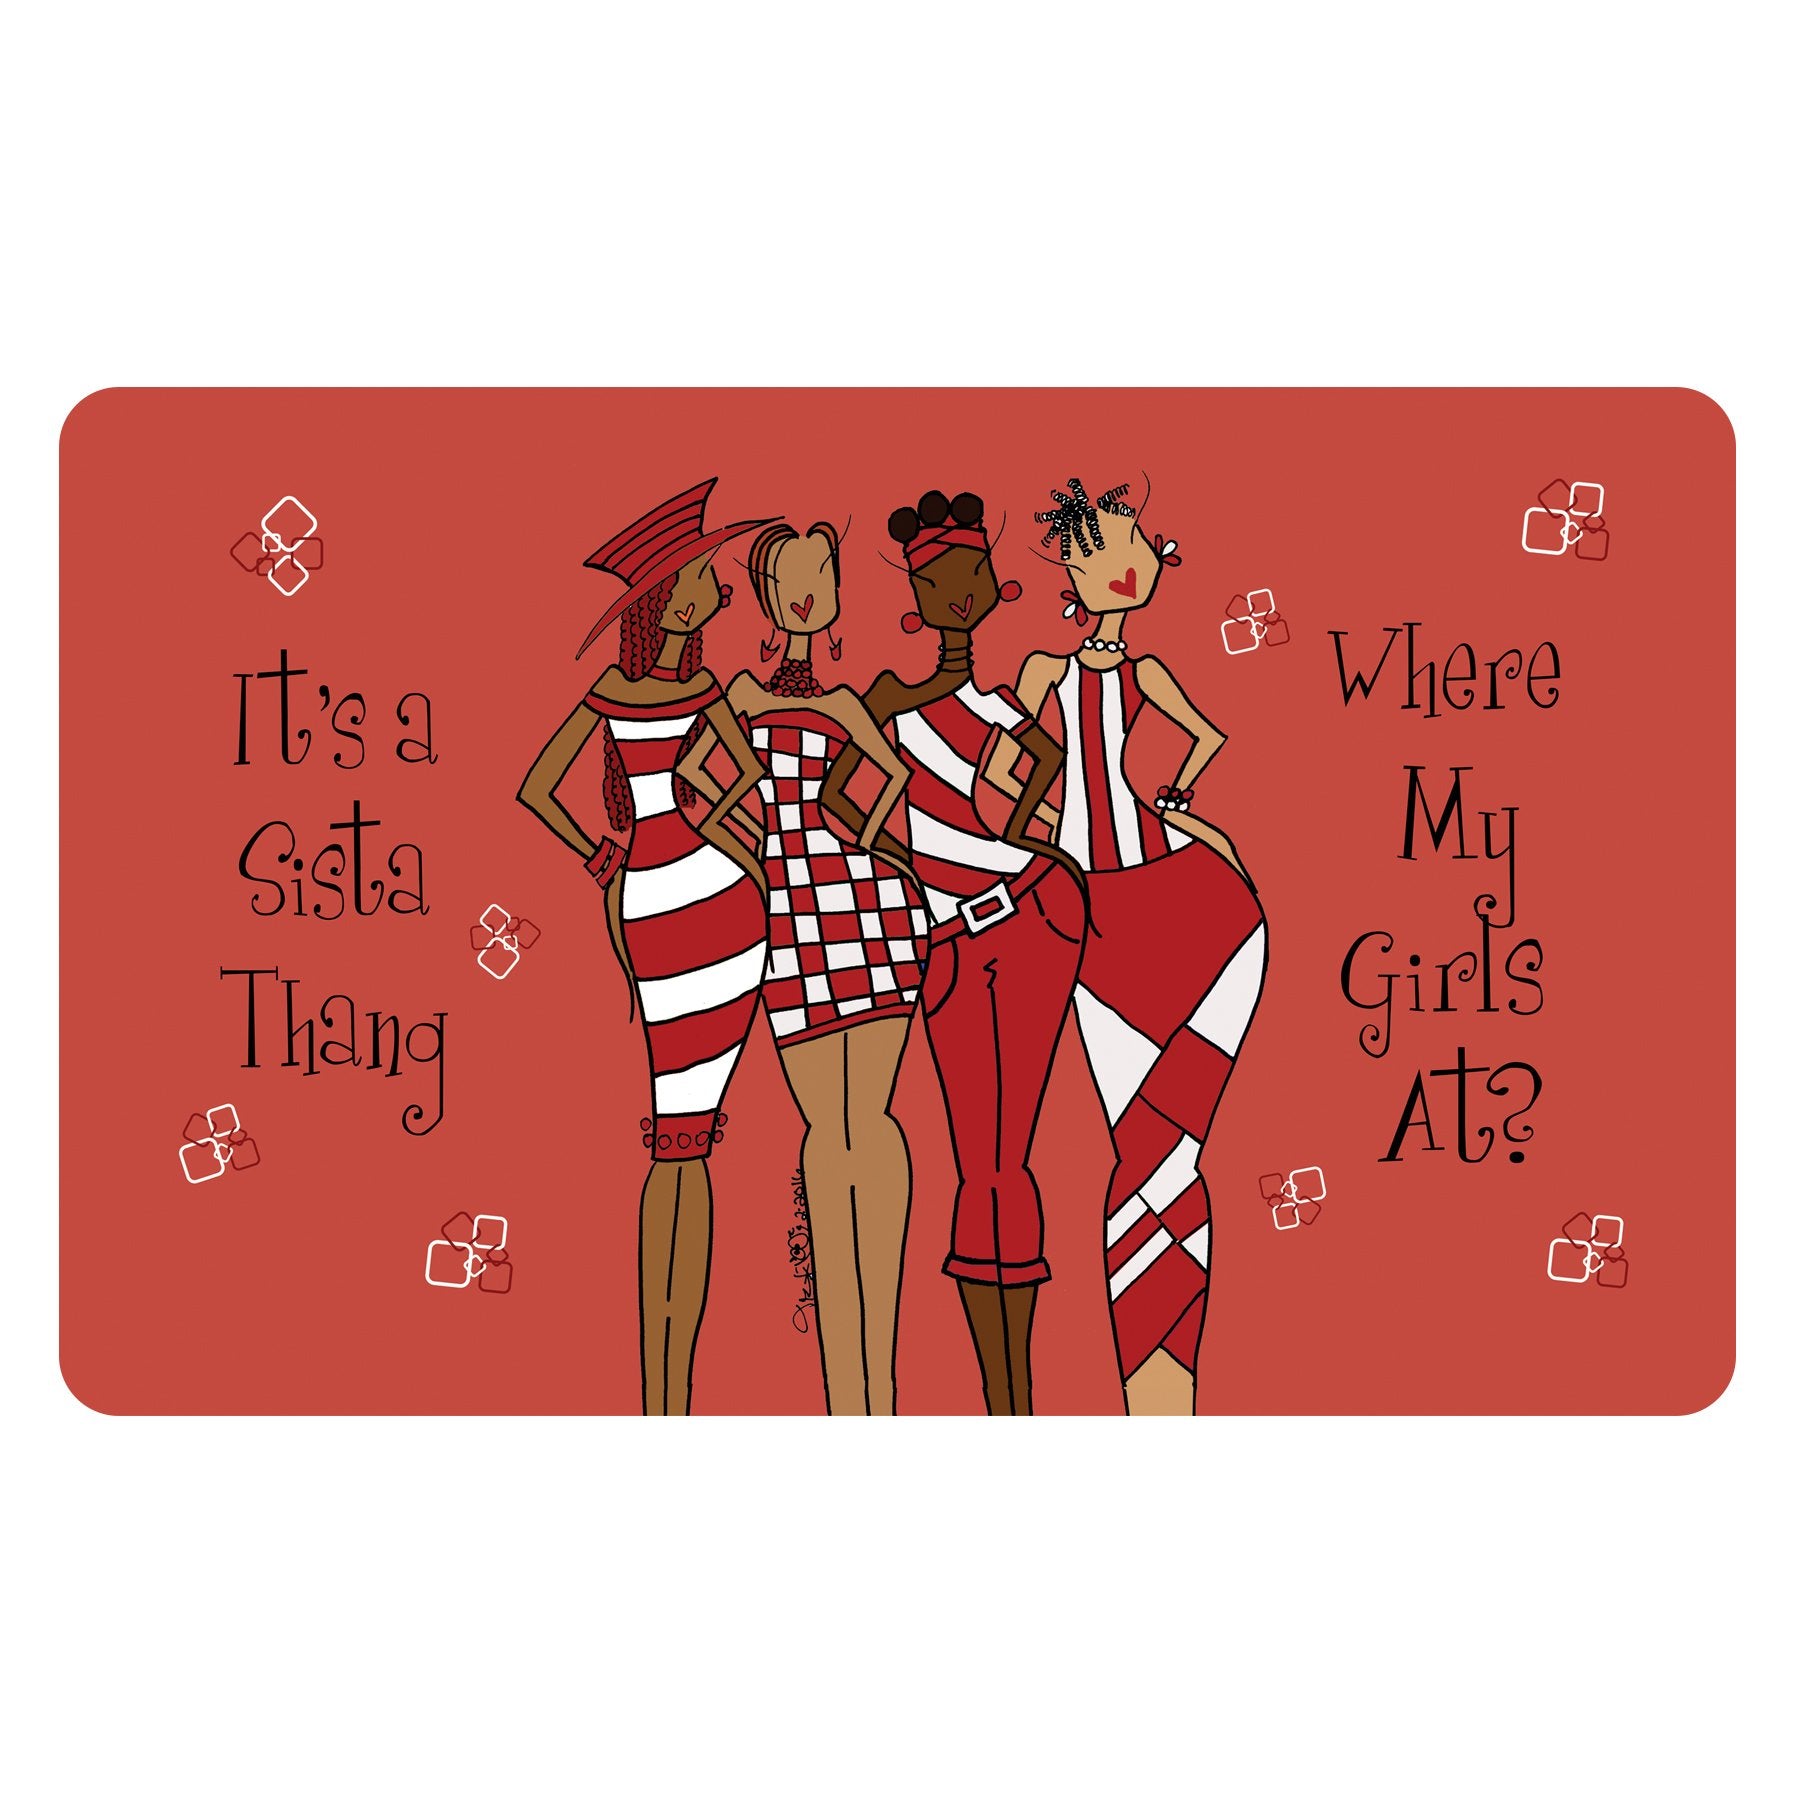 1 of 2: It's a Sista Thang - Where My Girls At?: Kiwi McDowell Interior Floor Mat by Shades of Color